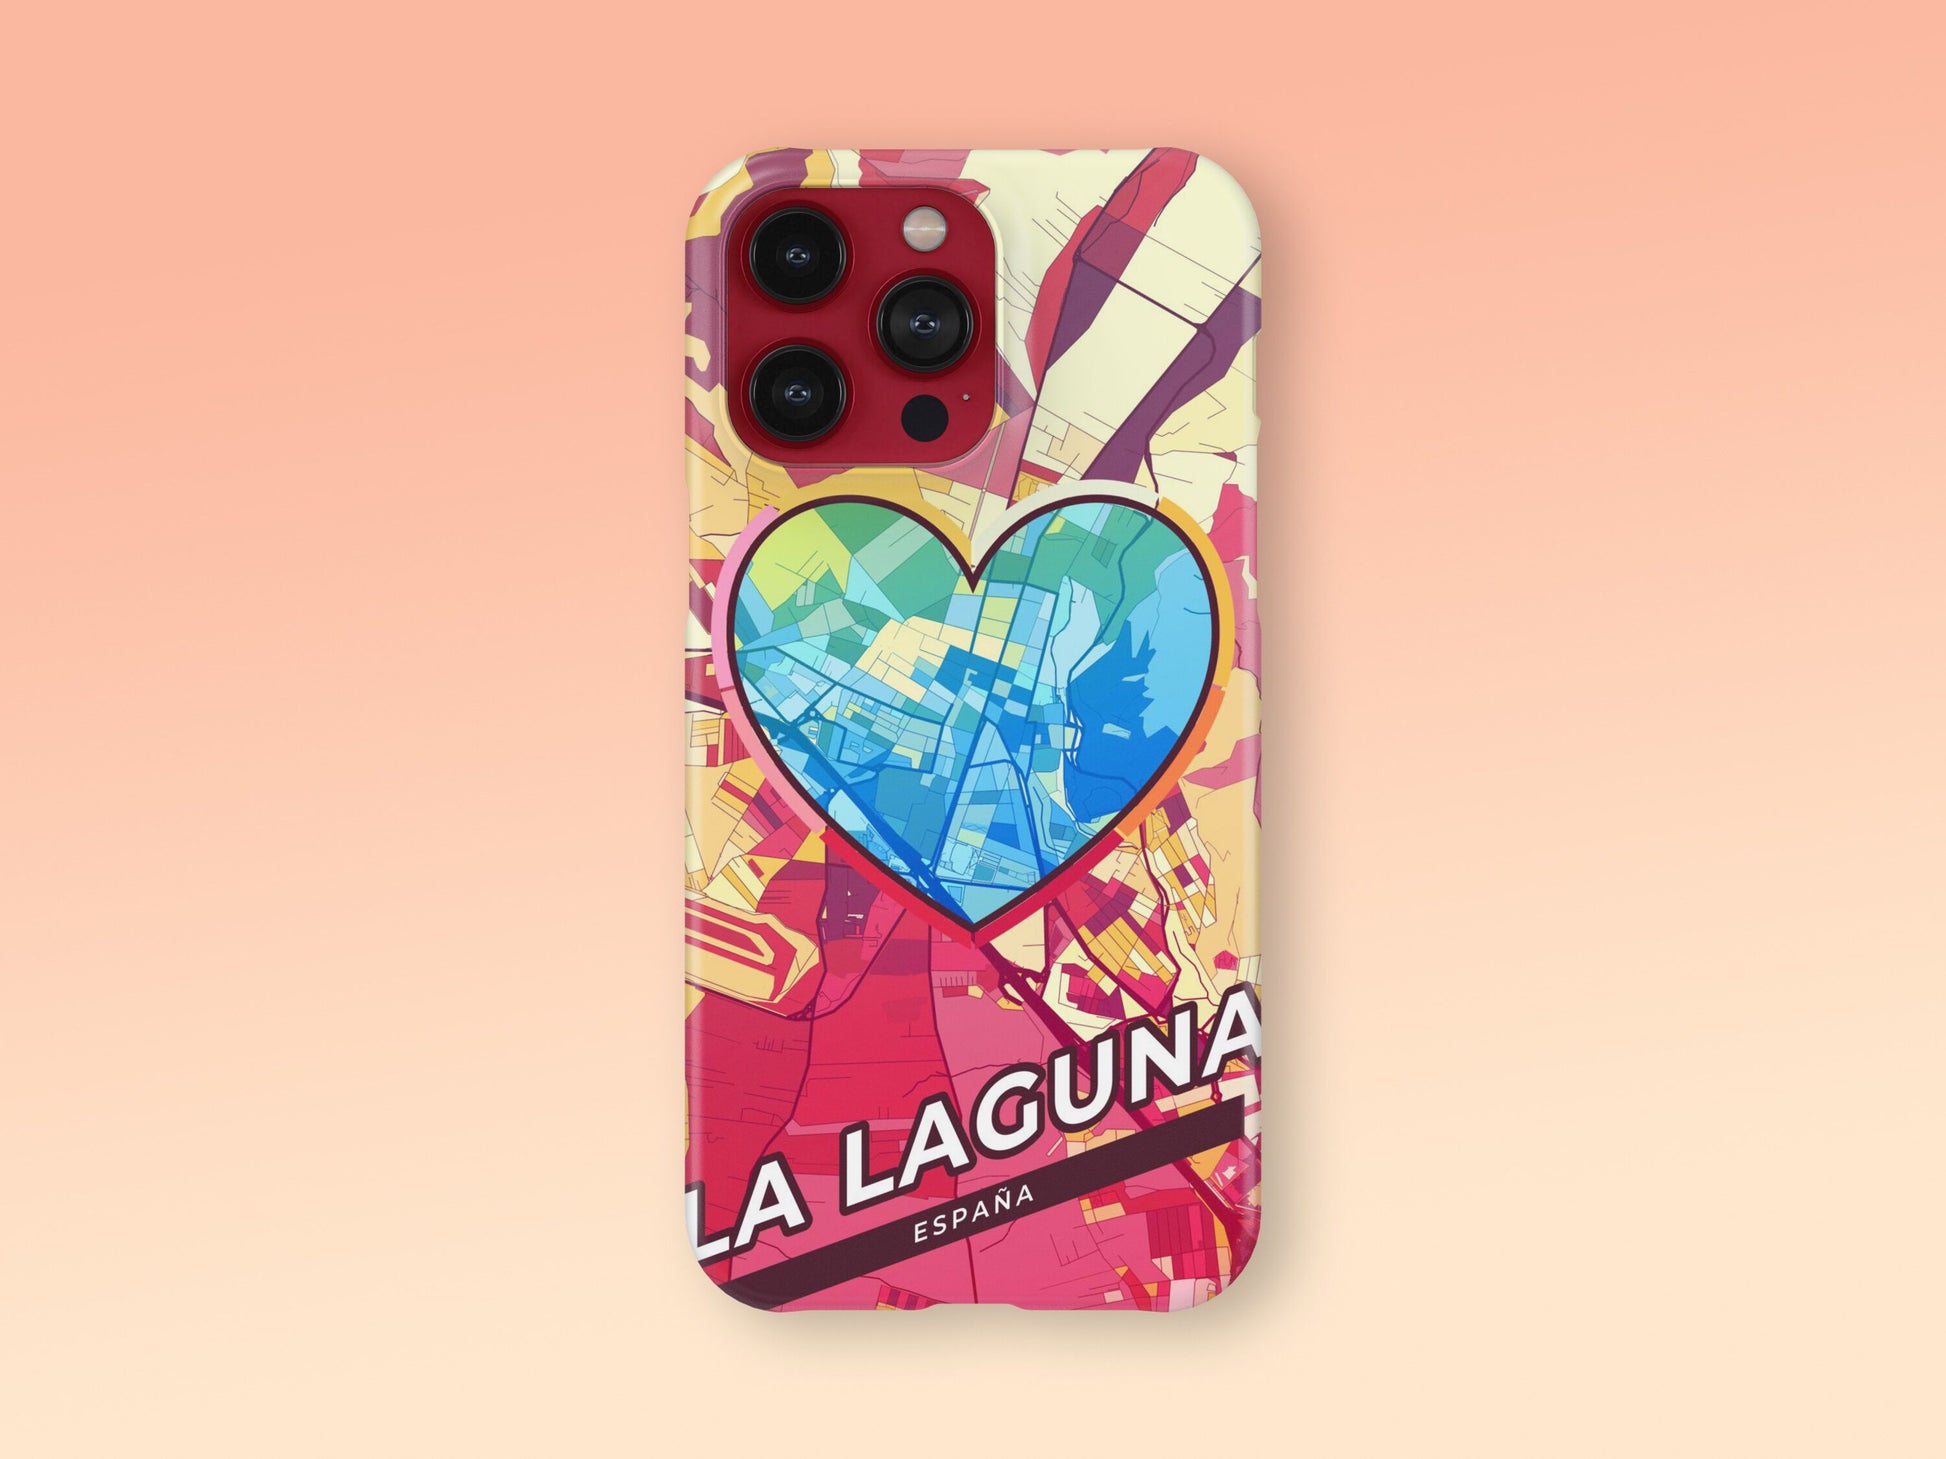 La Laguna Spain slim phone case with colorful icon. Birthday, wedding or housewarming gift. Couple match cases. 2